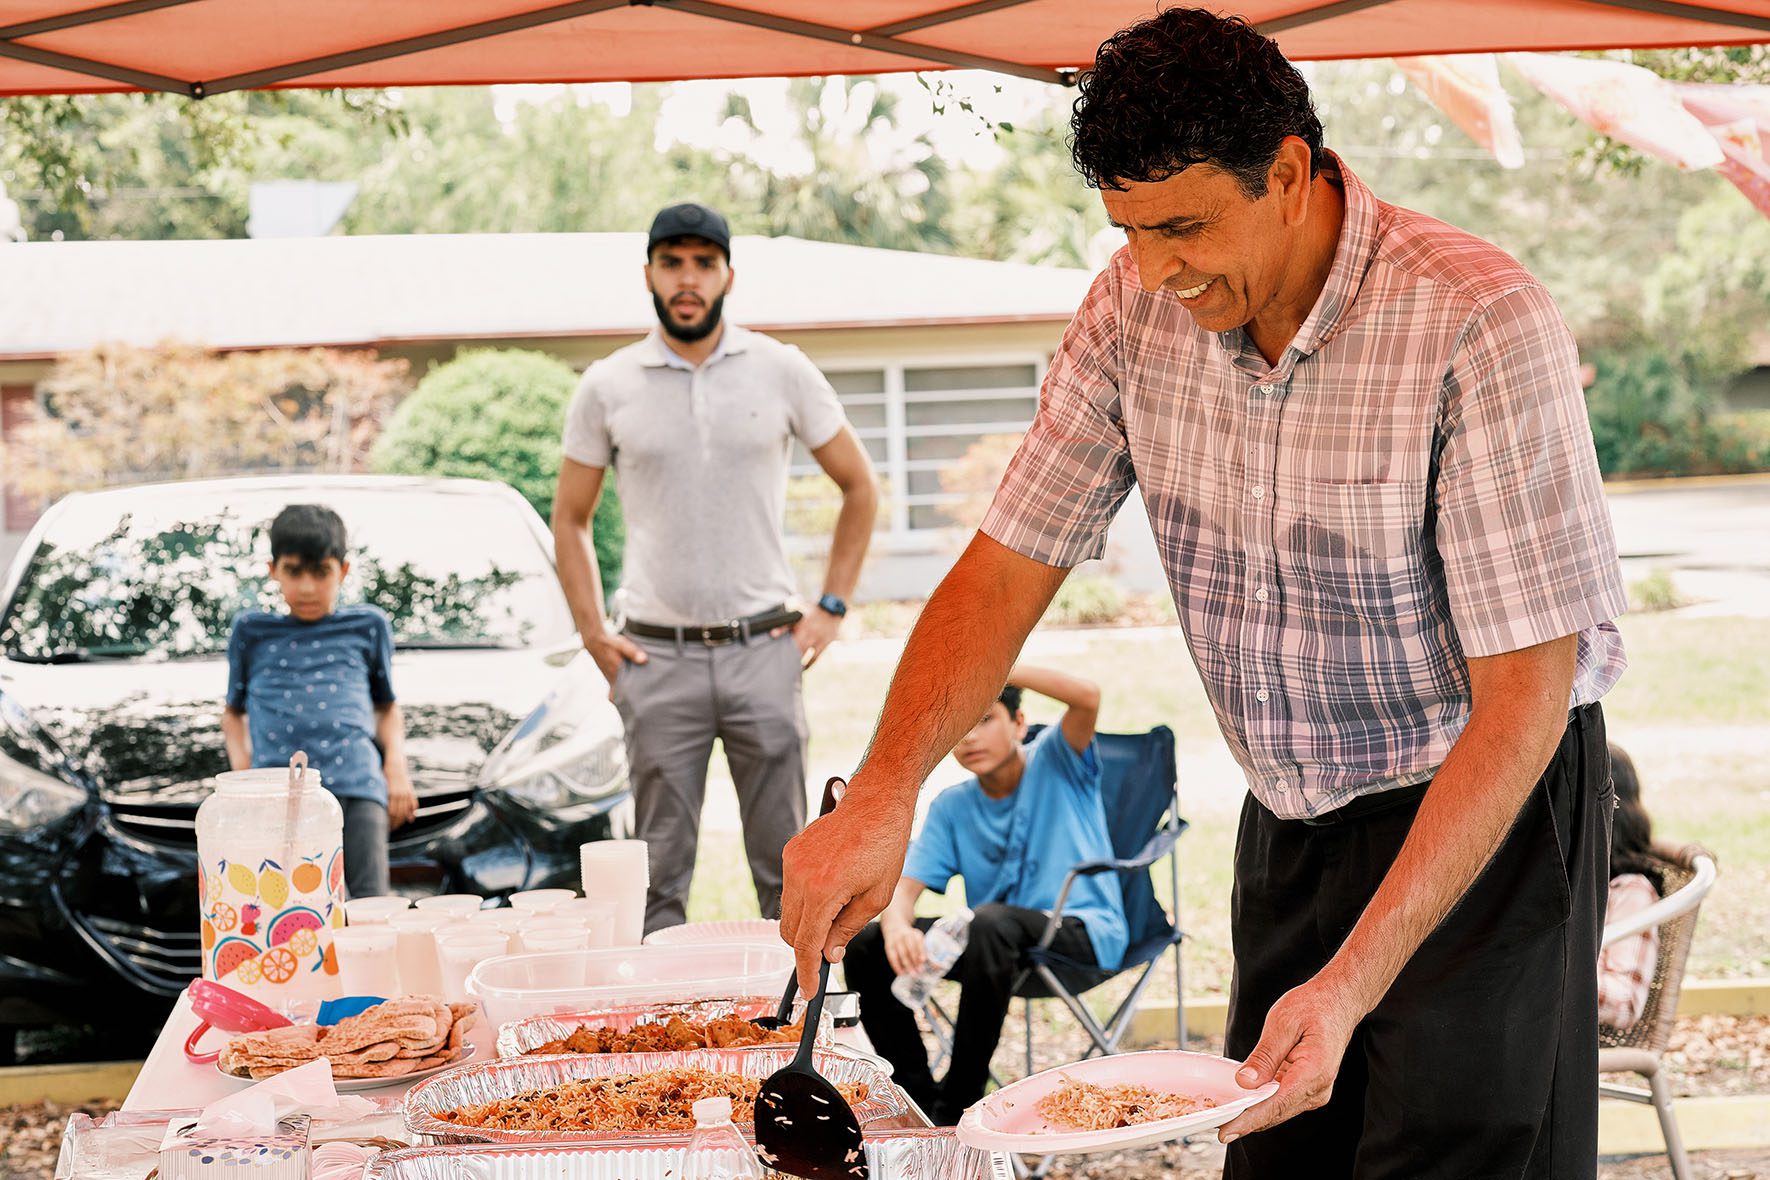 Rahmatullah Hamkar serves himself a plate of food after a hard day's work in the Refugee Garden in Clearwater, Florida on June 1, 2023. Some of the food for the event was made with crops harvested from the garden. | Community Garden for Refugees Offers Belonging & a Taste of Home | HIAS